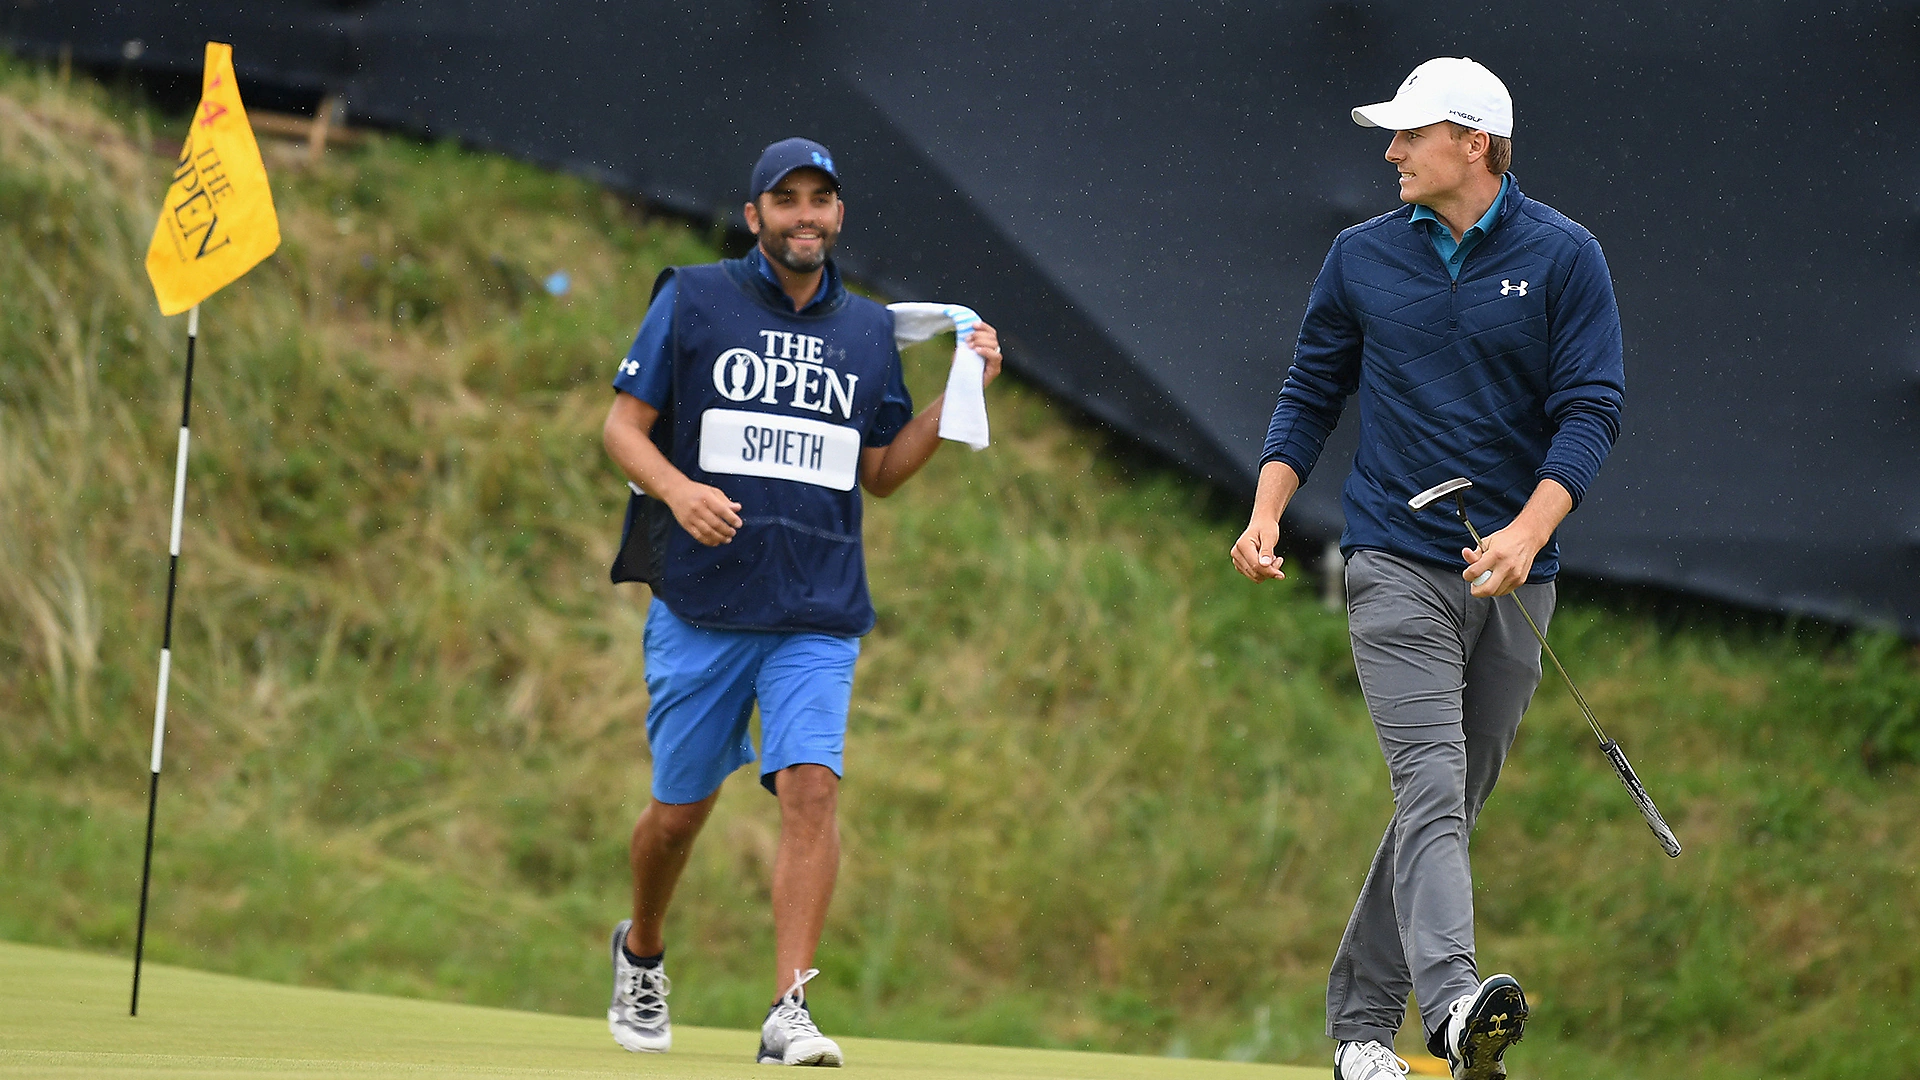 Twitter goes nuts over Spieth's Open win at Birkdale